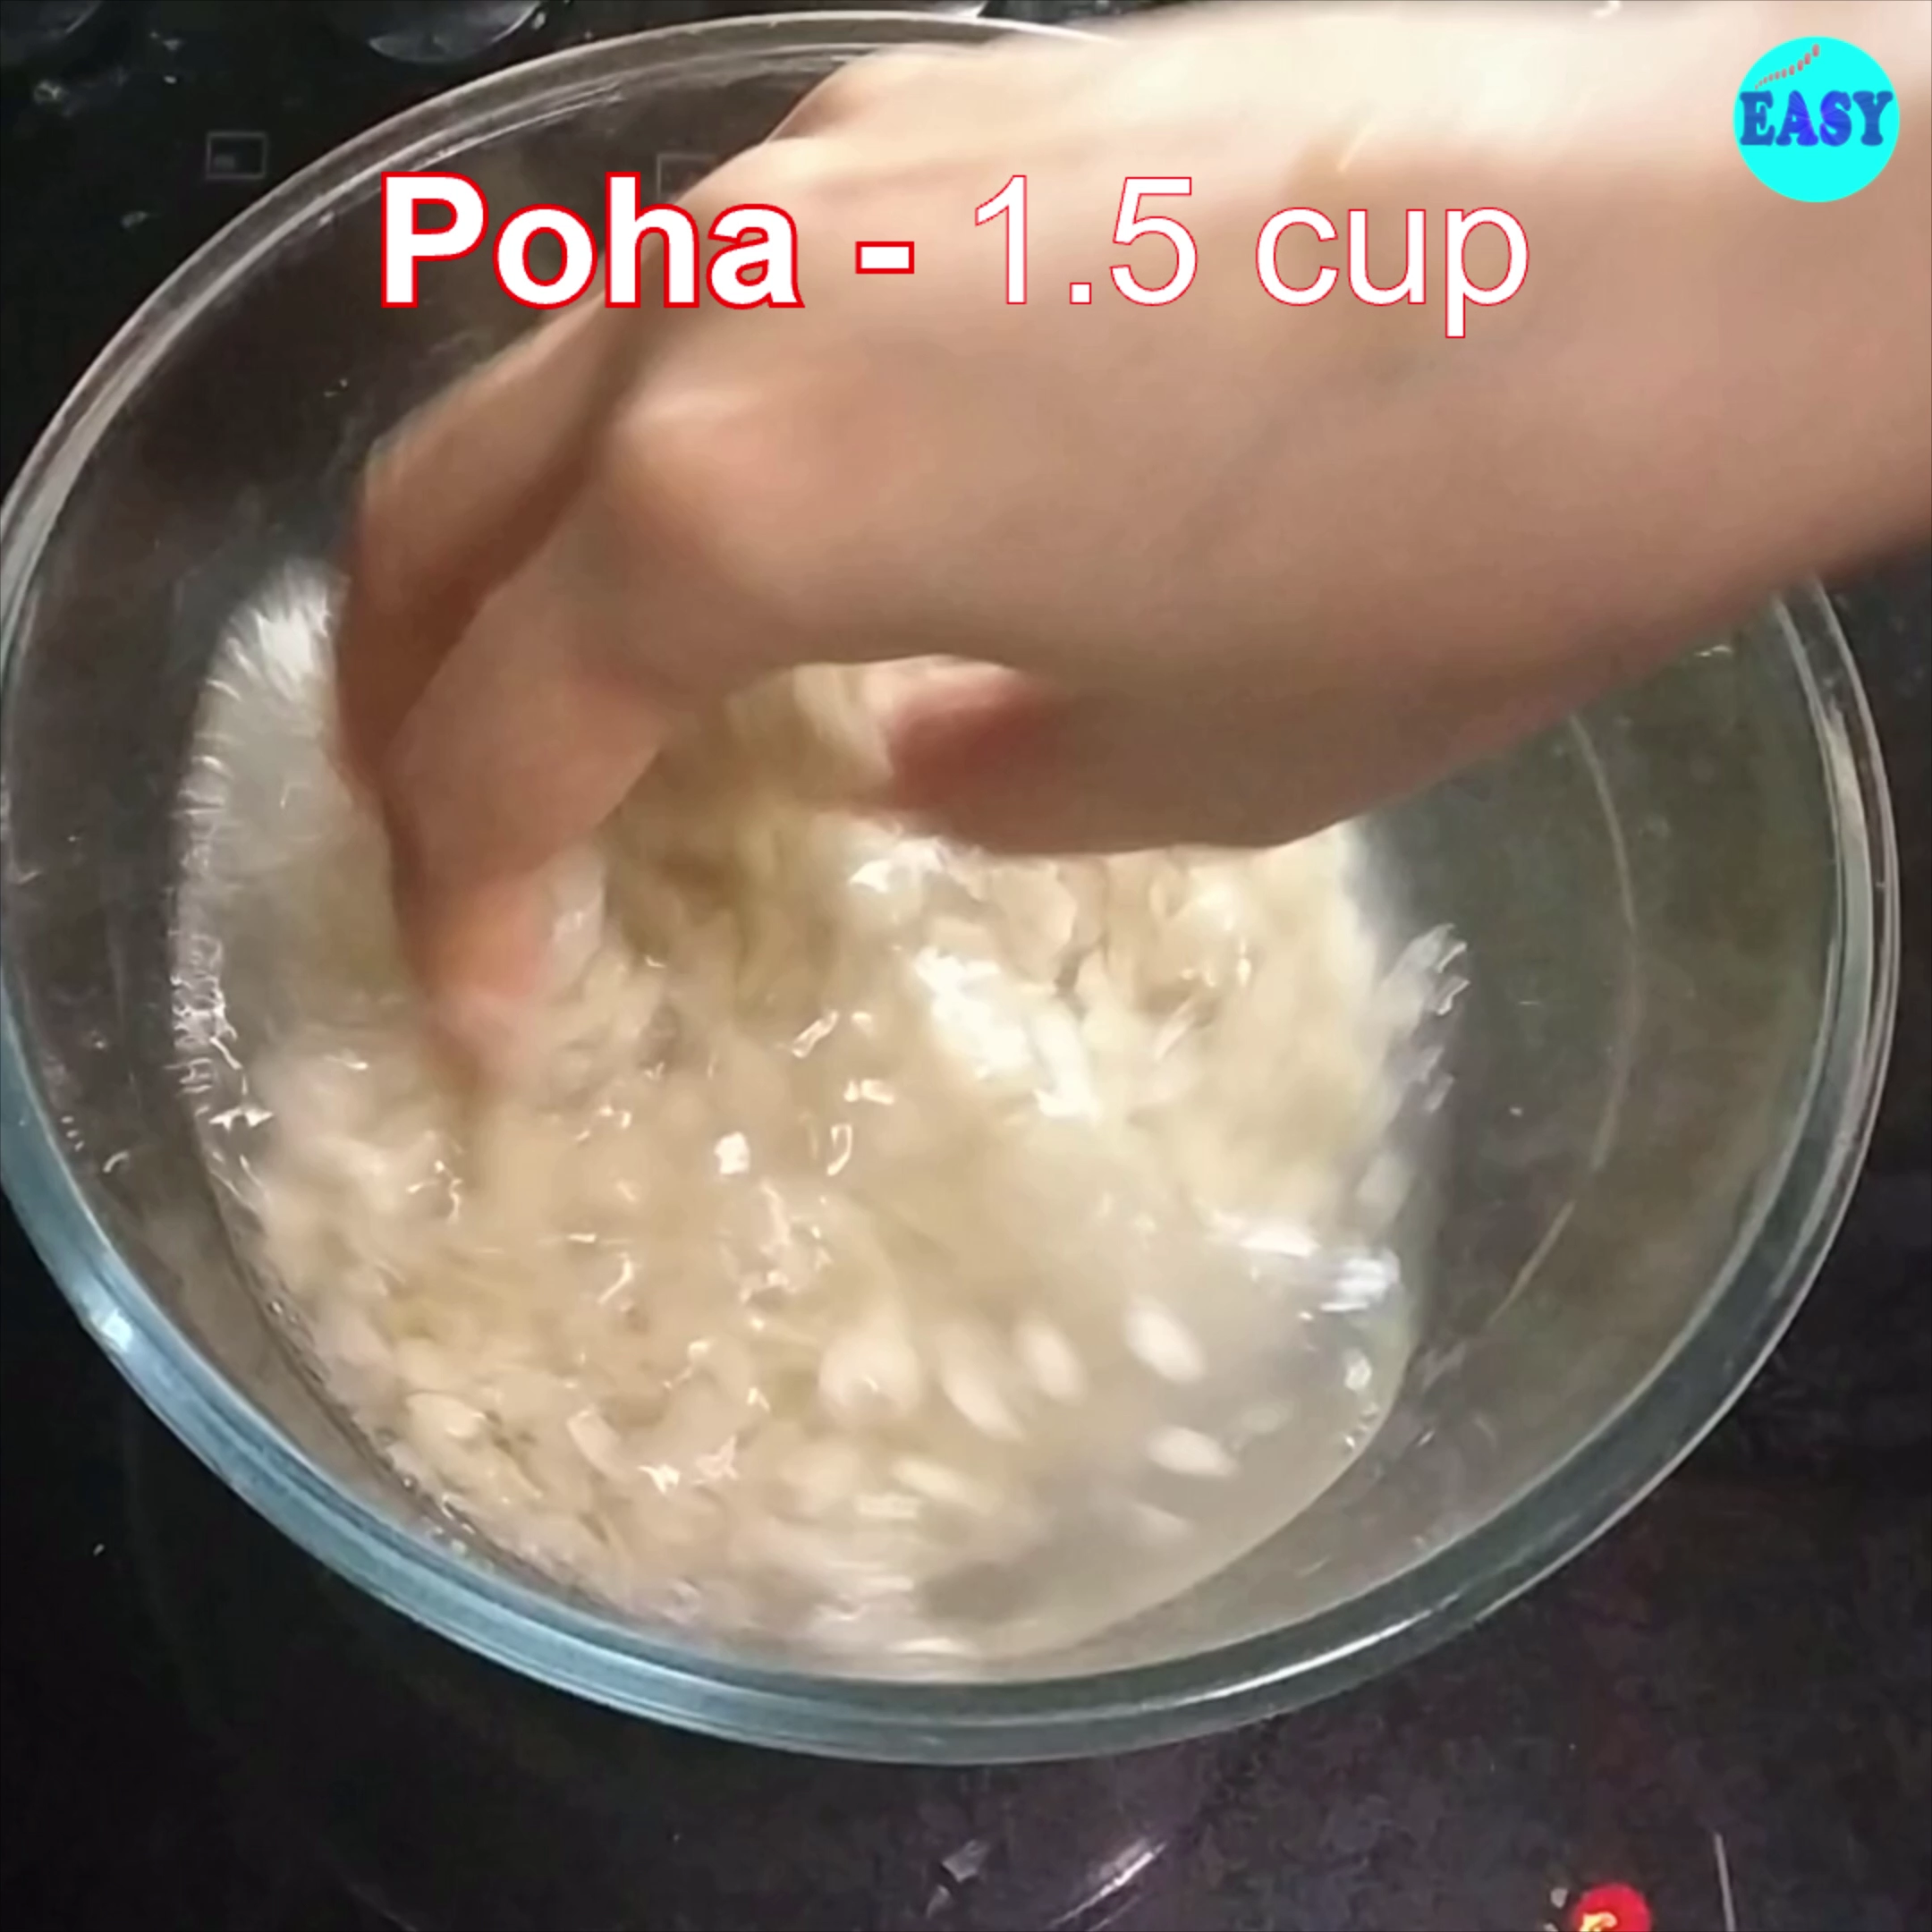 Step 1 - Take thick poha and wash it well with water one or two times. Drain the water and keep it aside. It should turn soft after this step. To check, press a flake between your thumb and index finger, it should break easily.